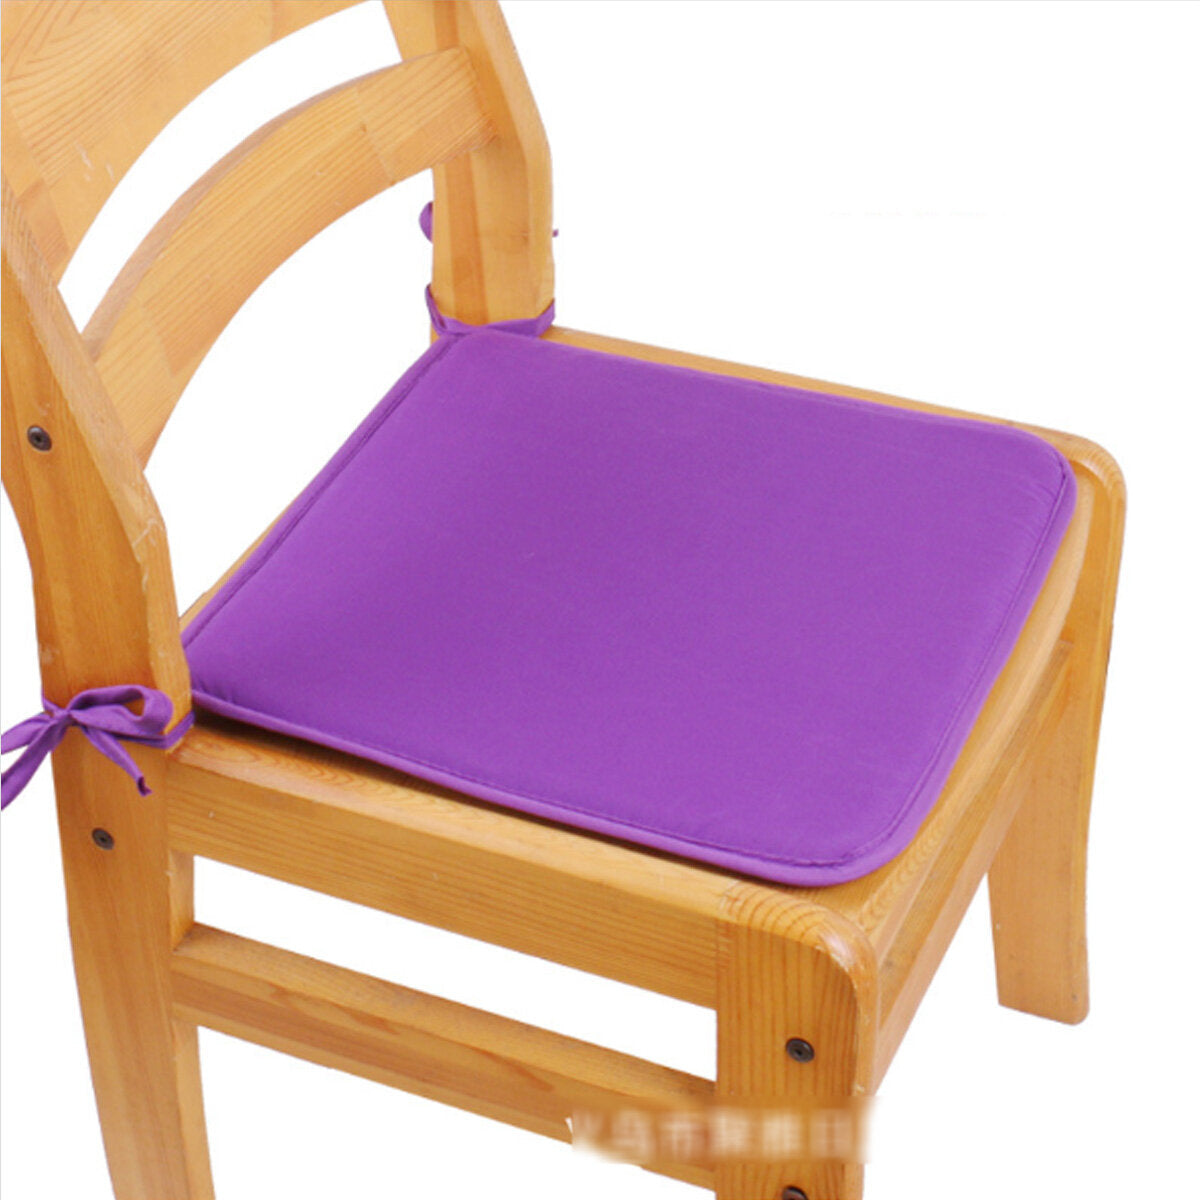 15.7" Seat Cushion Dining Chair Pad Comfortable Office Home Garden Dining Room Kitchen Patio Chair Mat Furniture Decorations